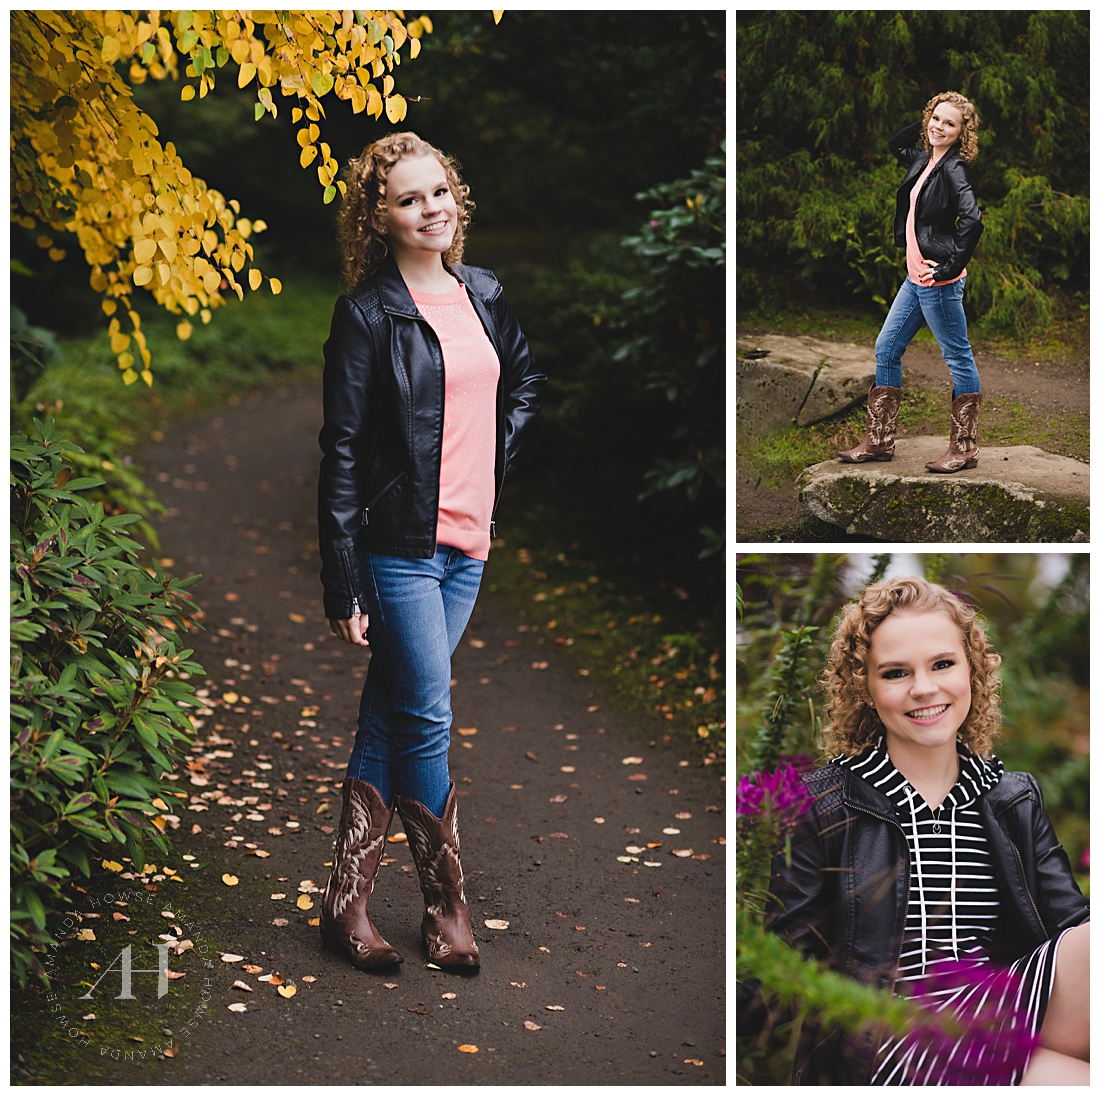 Senior Portraits on a Nature Trail | Candid senior portraits outside, how to style a casual outdoor senior portrait session, leather jacket outfit ideas | Photographed by the Best Tacoma Senior Photographer Amanda Howse